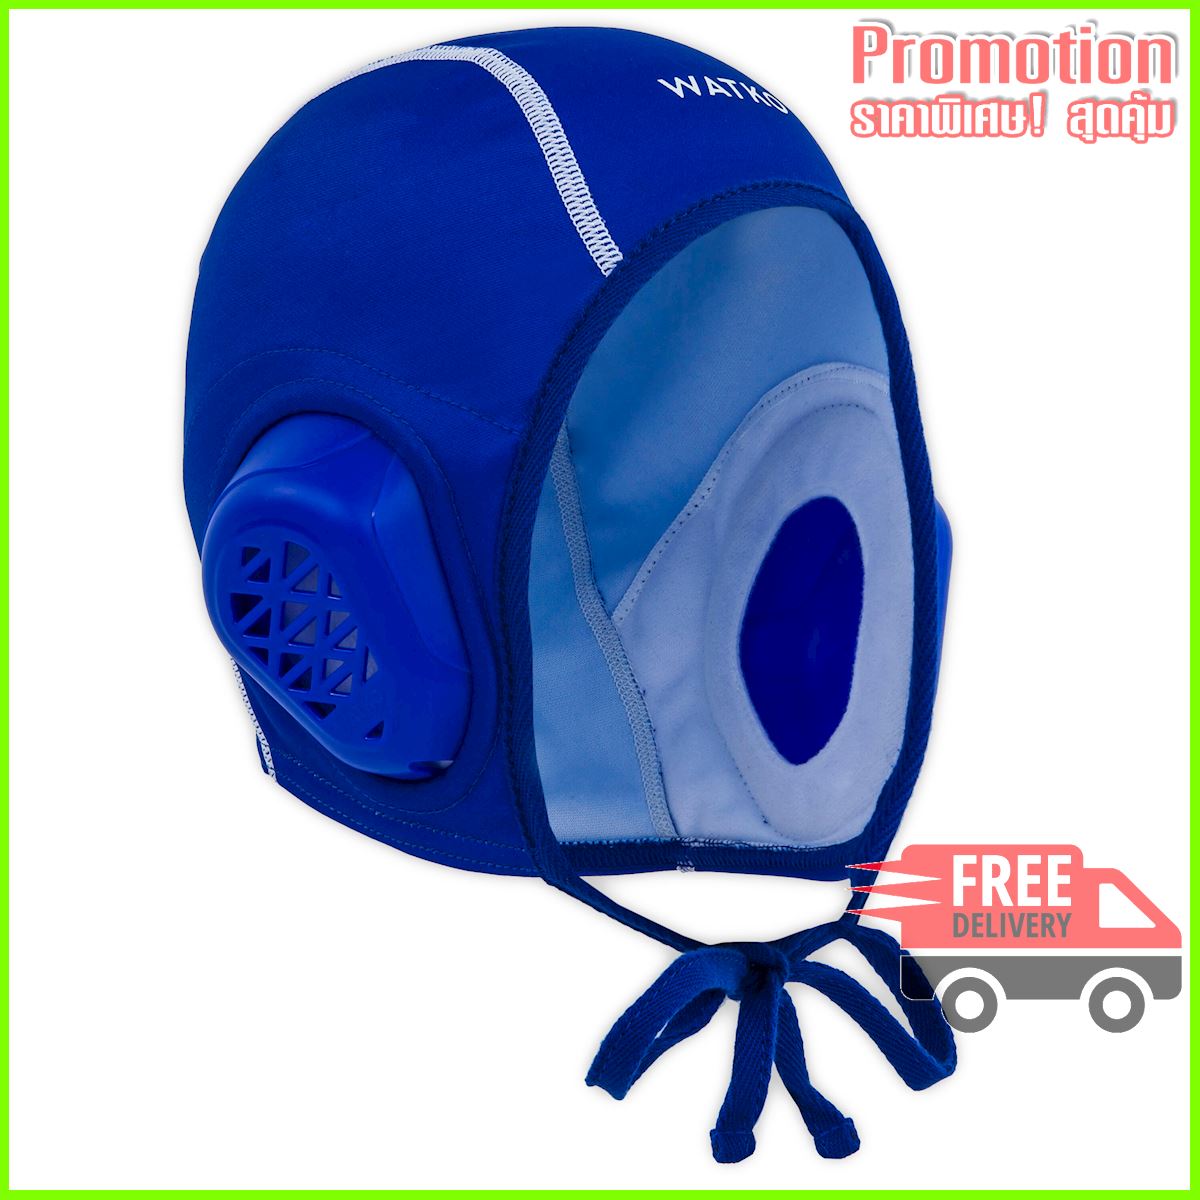 Blue 900 adult water polo cap